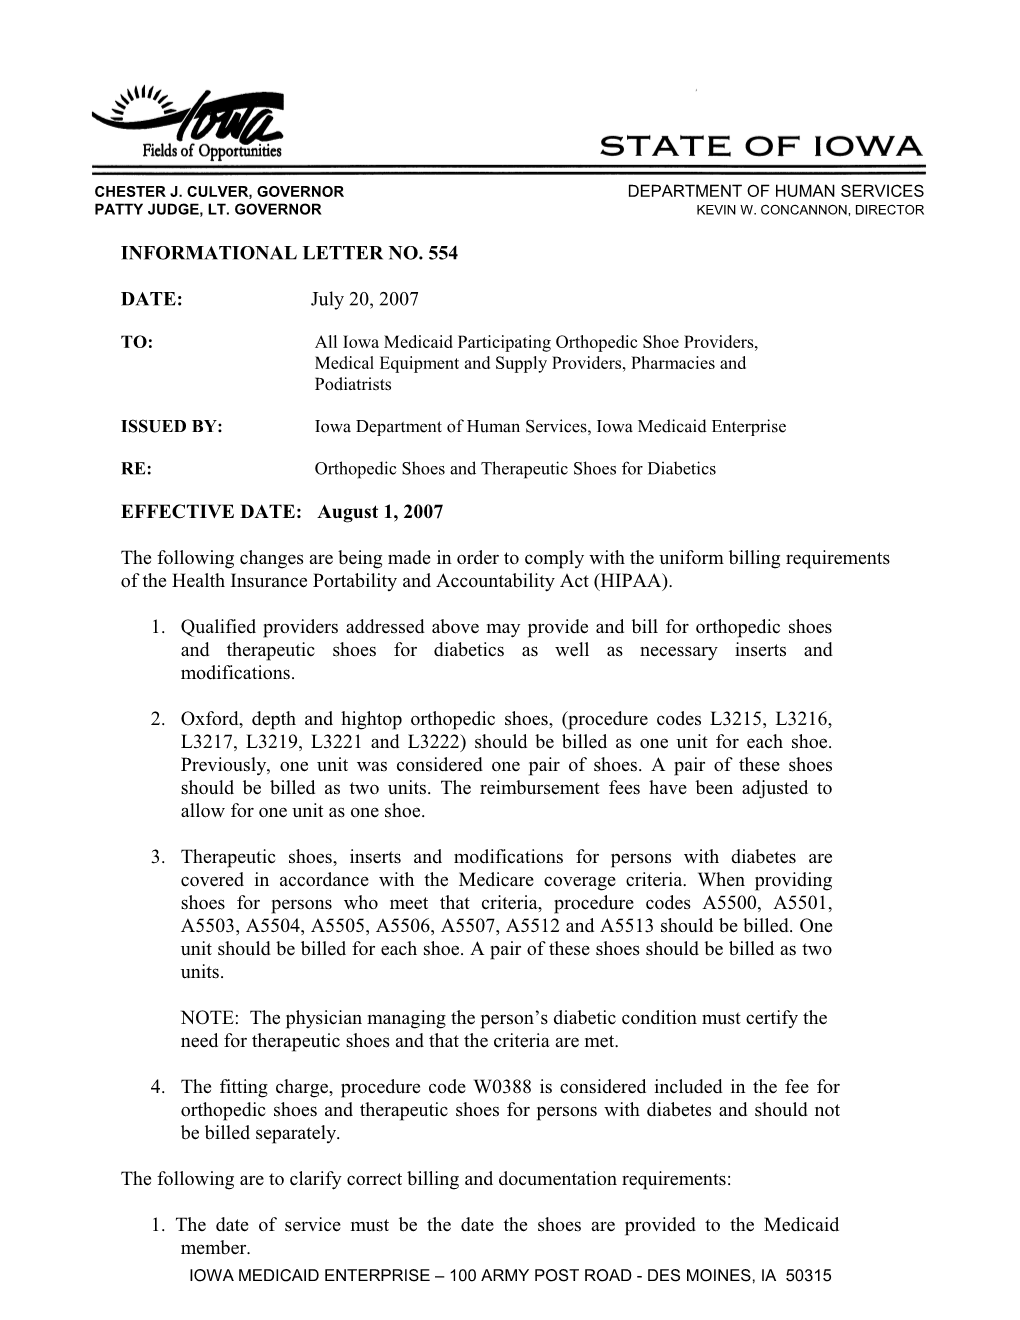 Department of Human Services Letterhead s3